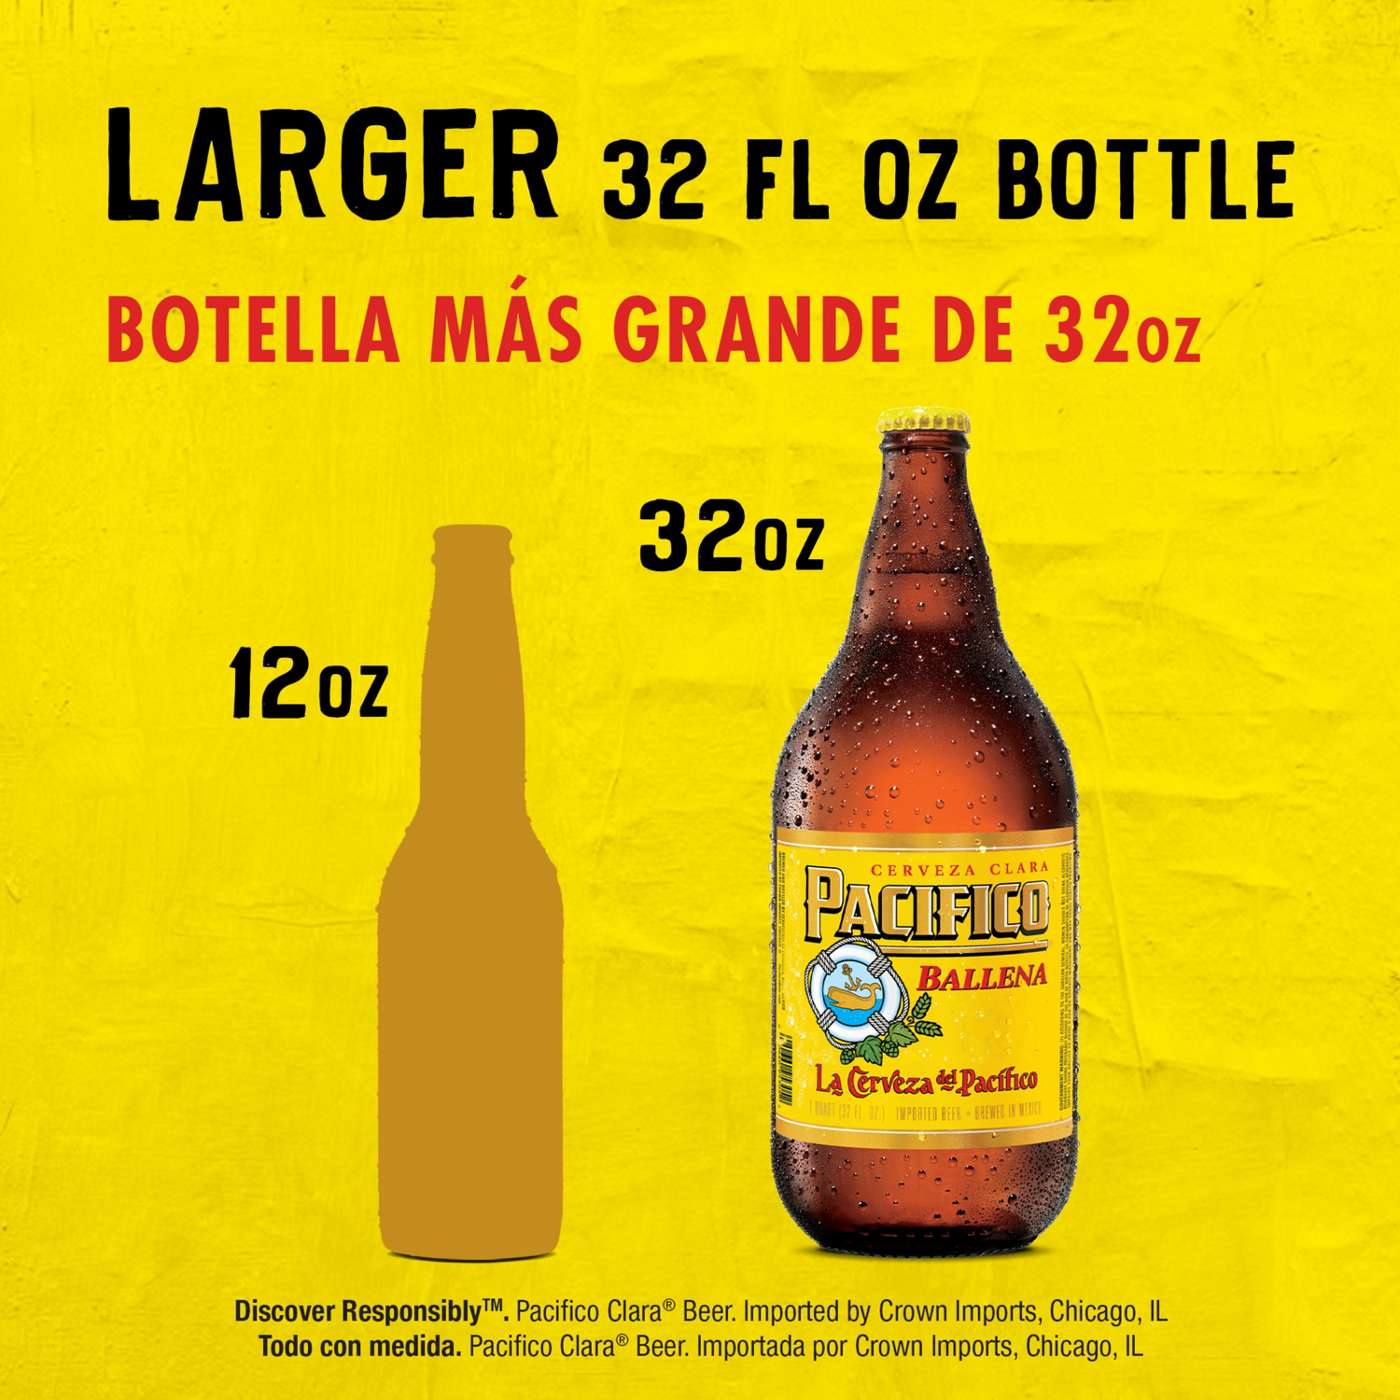 Pacifico Clara Ballena Mexican Lager Import Beer 32 oz Bottle; image 6 of 9